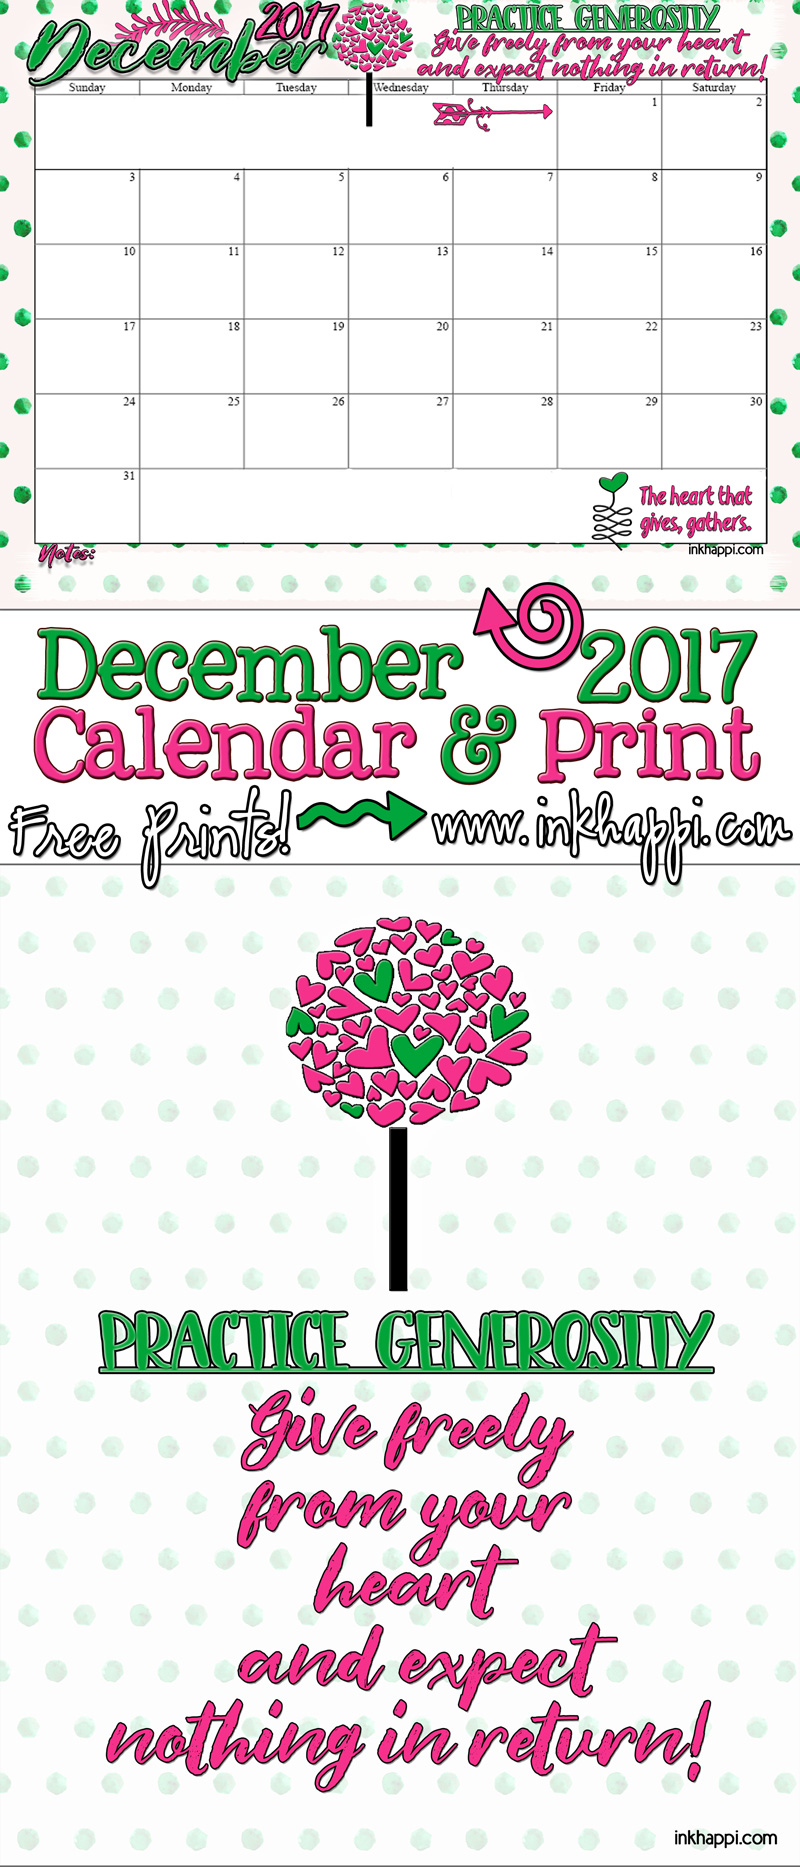 december-2017-calendar-and-a-thought-about-generosity-inkhappi